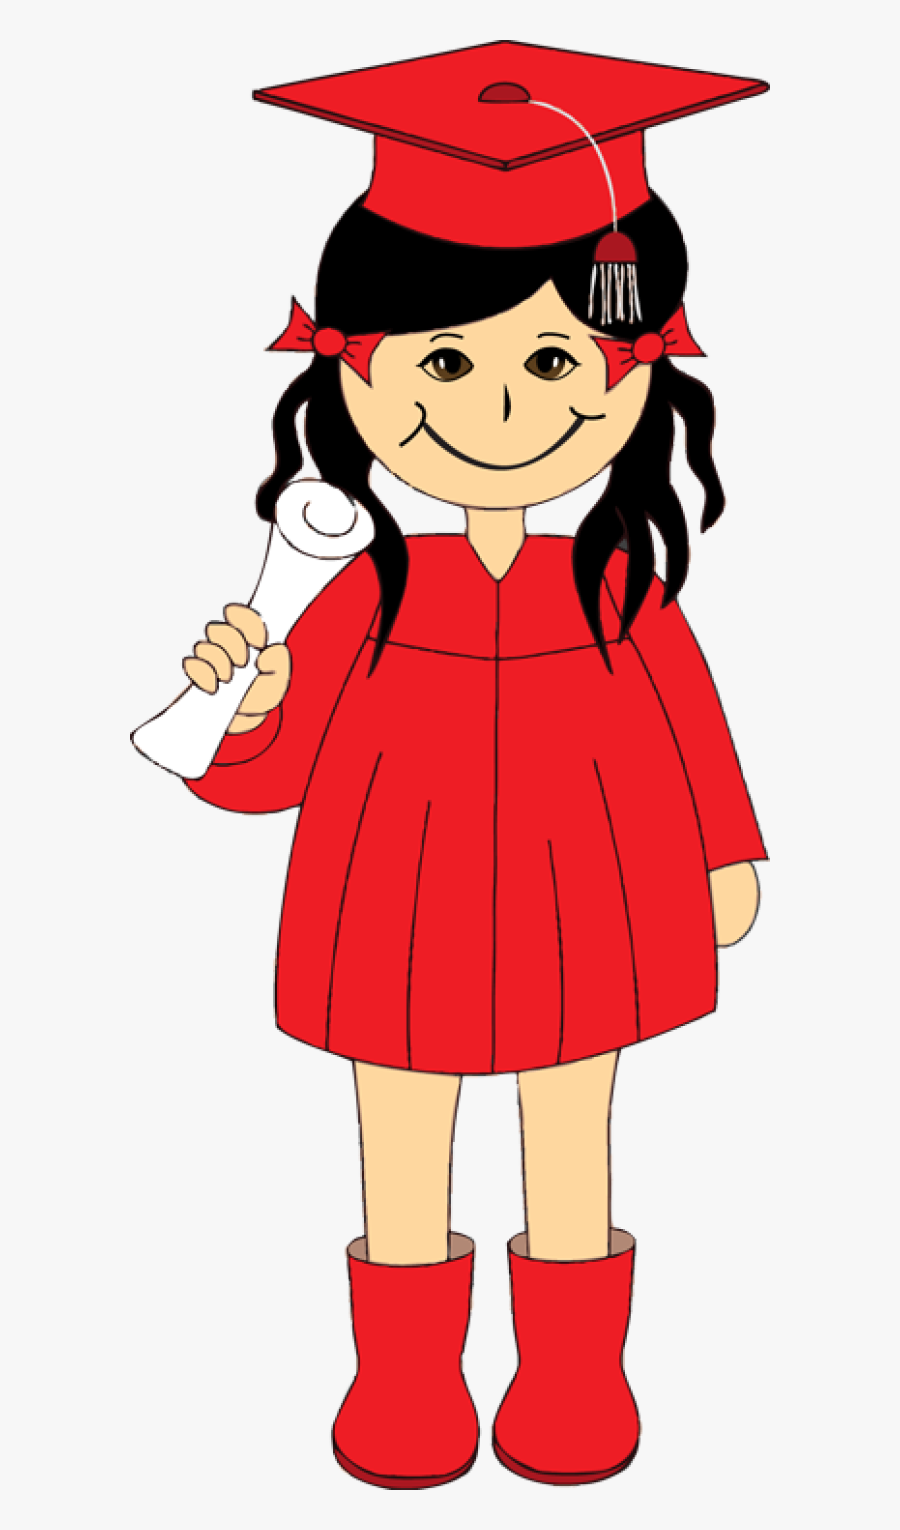 Get Creative With This Free Kids Clip Art - Red Graduation Gown Clipart, Transparent Clipart